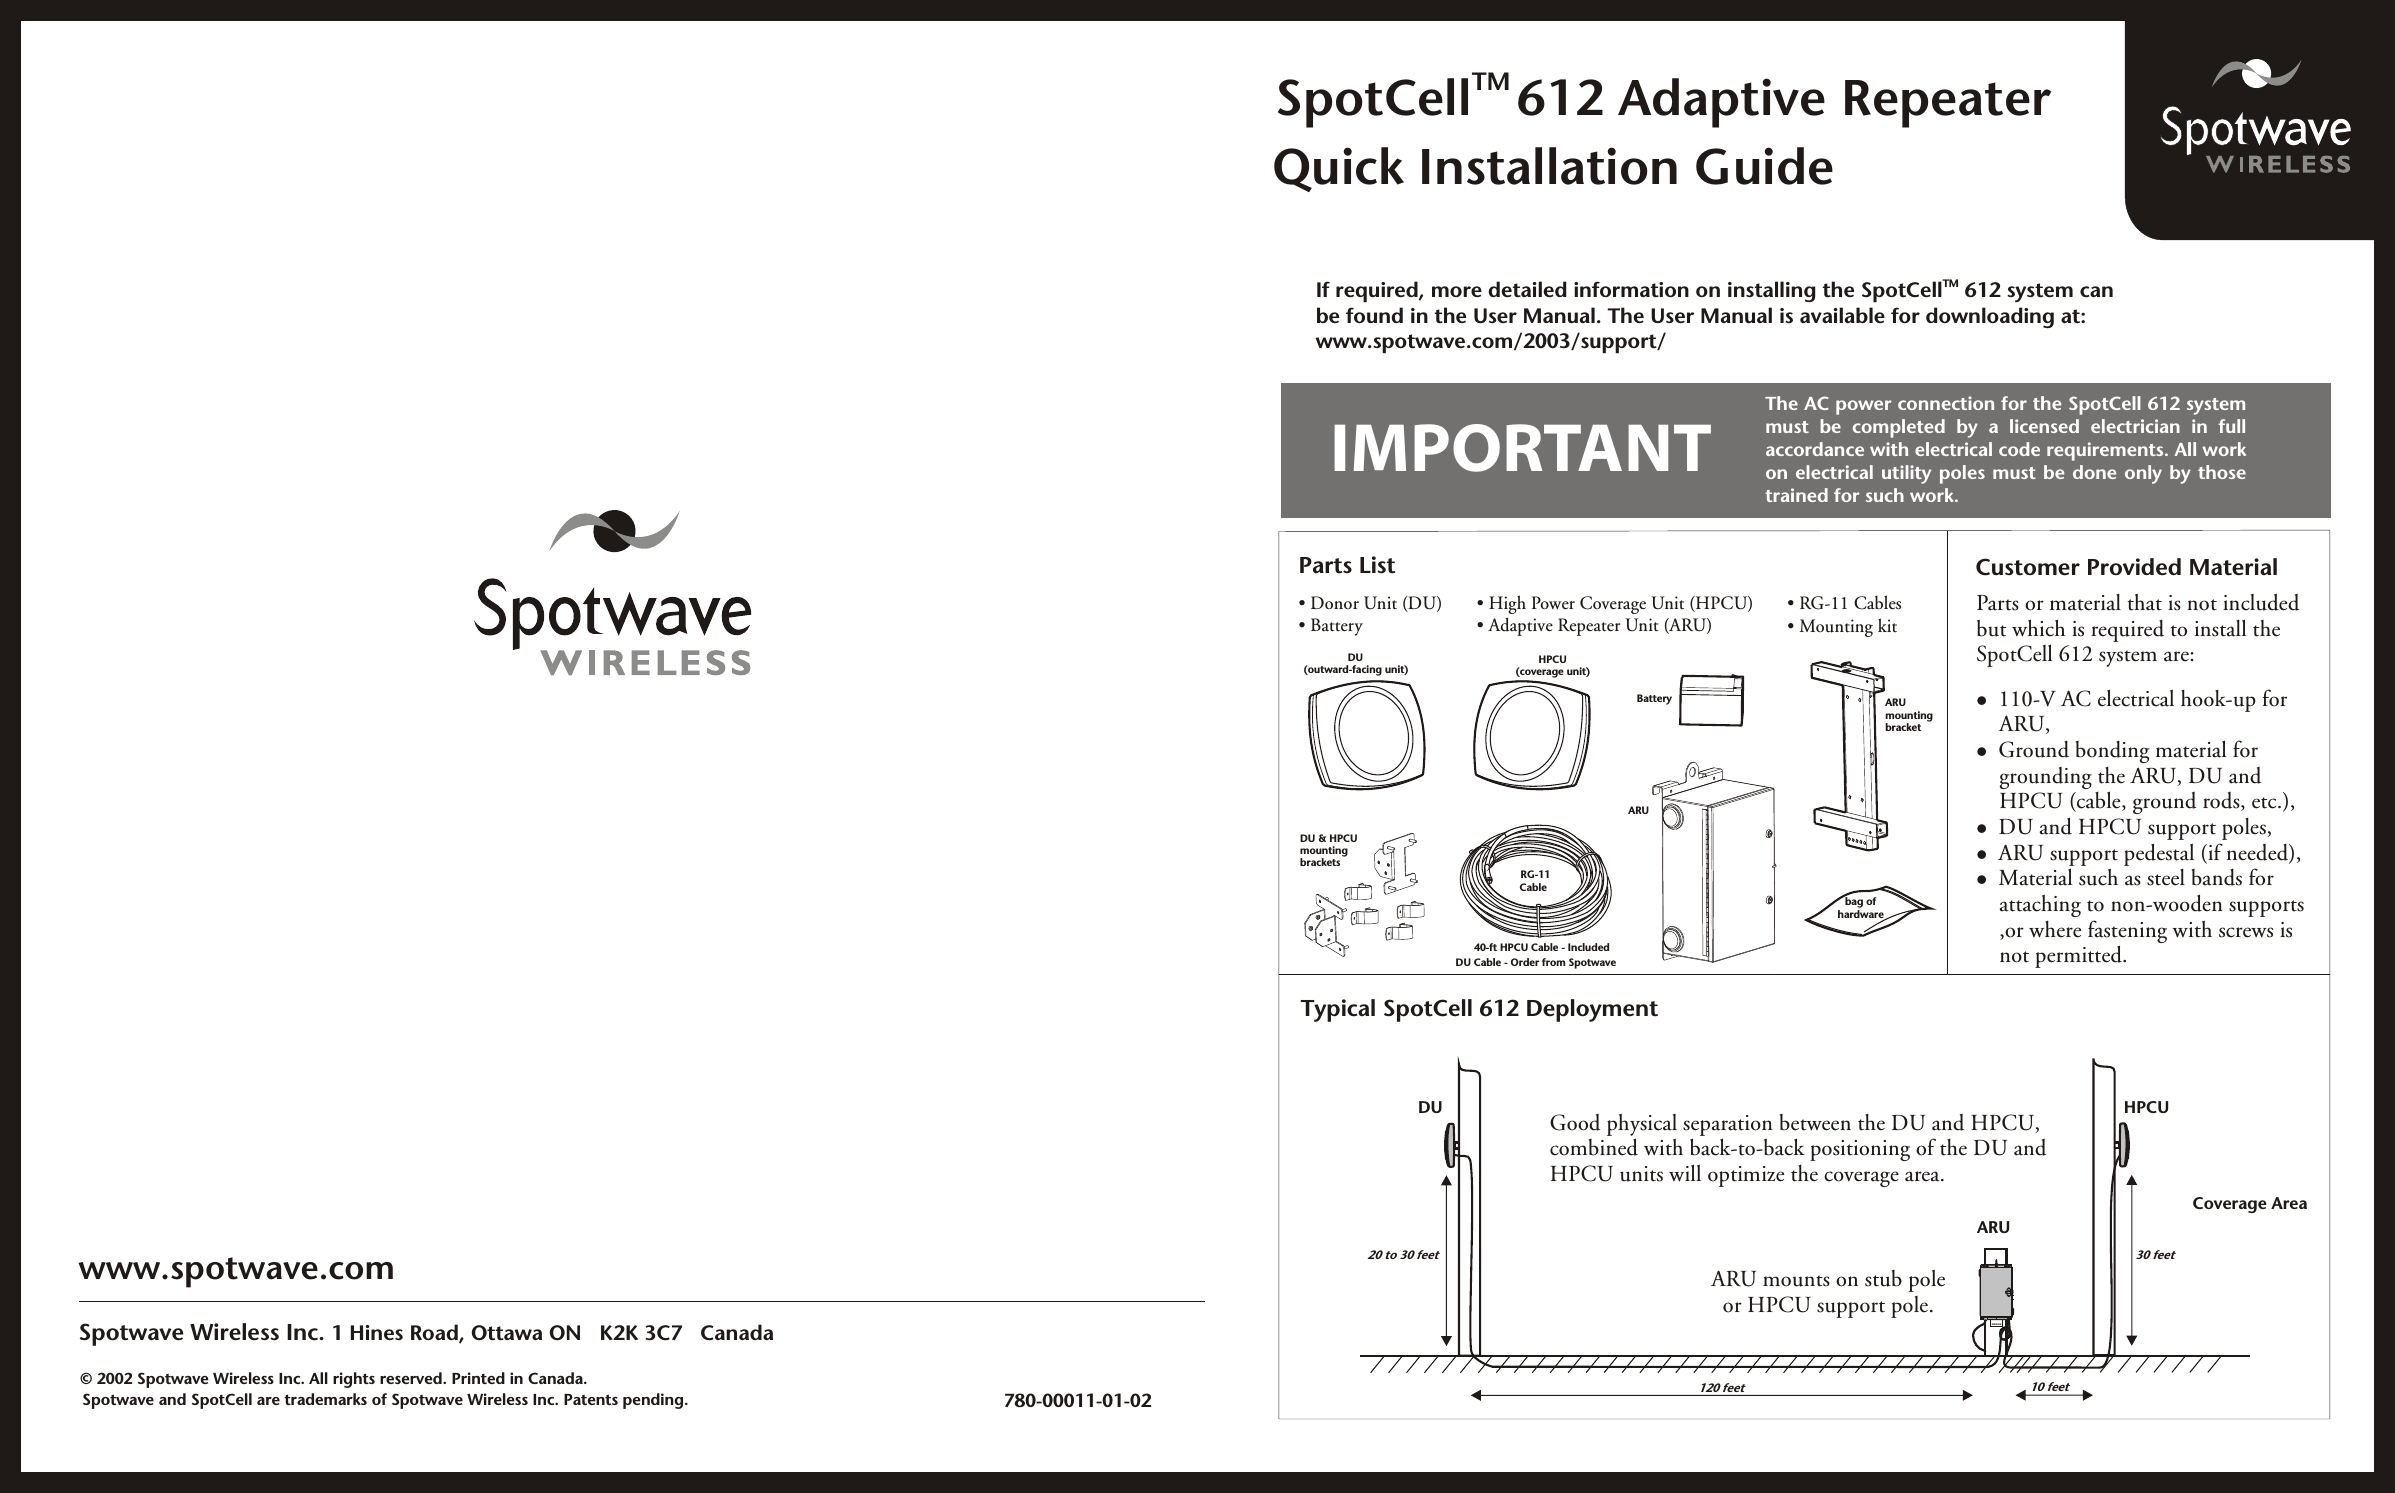 TM SpotCell 612 Adaptive RepeaterQuick Installation Guidewww.spotwave.comSpotwave Wireless Inc. 1 Hines Road, Ottawa ON   K2K 3C7   Canada           780-00011-01-02    Spotwave and SpotCell are trademarks of Spotwave Wireless Inc. Patents pending.Parts List• Mounting kit• RG-11 Cables• High Power Coverage Unit (HPCU)• Adaptive Repeater Unit (ARU)DU (outward-facing unit)HPCU(coverage unit)• Donor Unit (DU)• BatteryBatteryARUARUmountingbracketCustomer Provided MaterialTypical SpotCell 612 DeploymentDUARU120 feet20 to 30 feetIMPORTANTDU &amp; HPCUmountingbracketsbag ofhardwareRG-11CableTMIf required, more detailed information on installing the SpotCell  612 system can be found in the User Manual. The User Manual is available for downloading at:www.spotwave.com/2003/support/The AC power connection for the SpotCell 612 system must  be  completed  by  a  licensed  electrician  in  fullaccordance with electrical code requirements. All workon electrical utility poles must be done only by thosetrained for such work. Parts or material that is not includedbut which is required to install theSpotCell 612 system are:l  110-V AC electrical hook-up for     ARU,l  Ground bonding material for     grounding the ARU, DU and     HPCU (cable, ground rods, etc.),l  DU and HPCU support poles,l  ARU support pedestal (if needed),l  Material such as steel bands for     attaching to non-wooden supports     ,or where fastening with screws is     not permitted.Good physical separation between the DU and HPCU,combined with back-to-back positioning of the DU andHPCU units will optimize the coverage area.© 2002 Spotwave Wireless Inc. All rights reserved. Printed in Canada.HPCUCoverage Area10 feet30 feetARU mounts on stub poleor HPCU support pole.40-ft HPCU Cable - IncludedDU Cable - Order from Spotwave